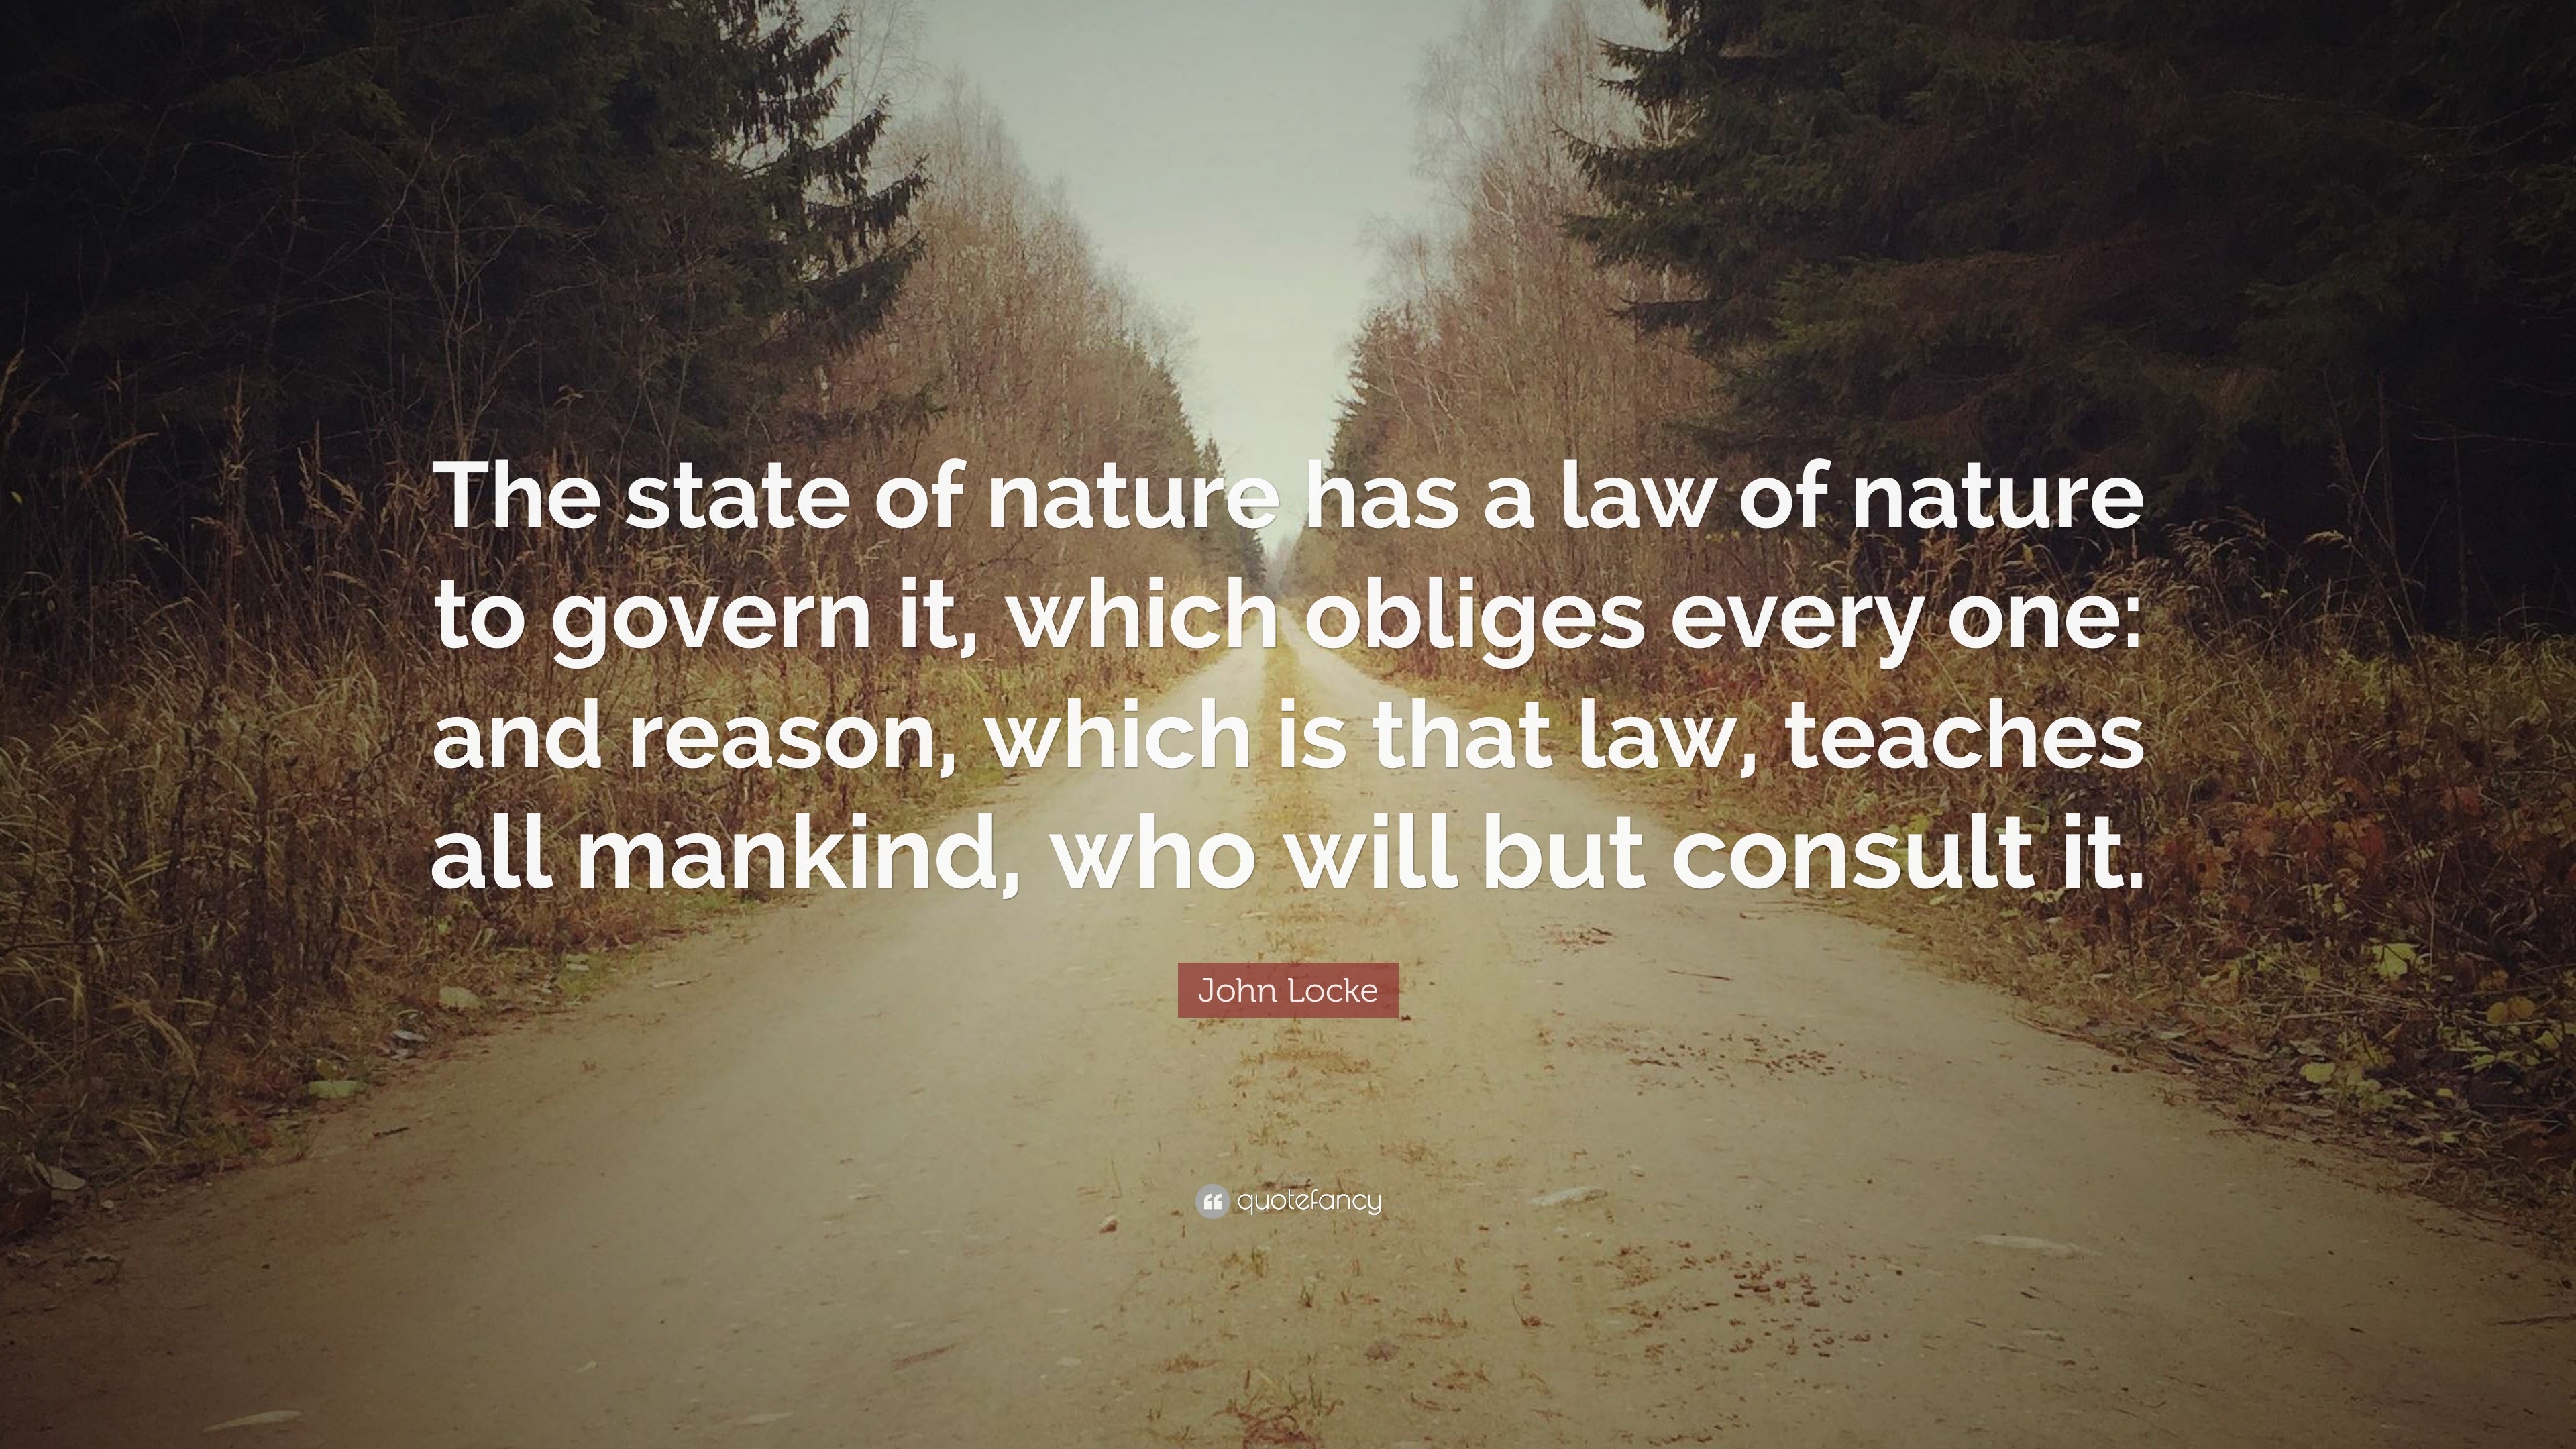 John Locke Quote: “The state of nature has a law of nature to govern it, which obliges every one: and reason, which is that law, teaches